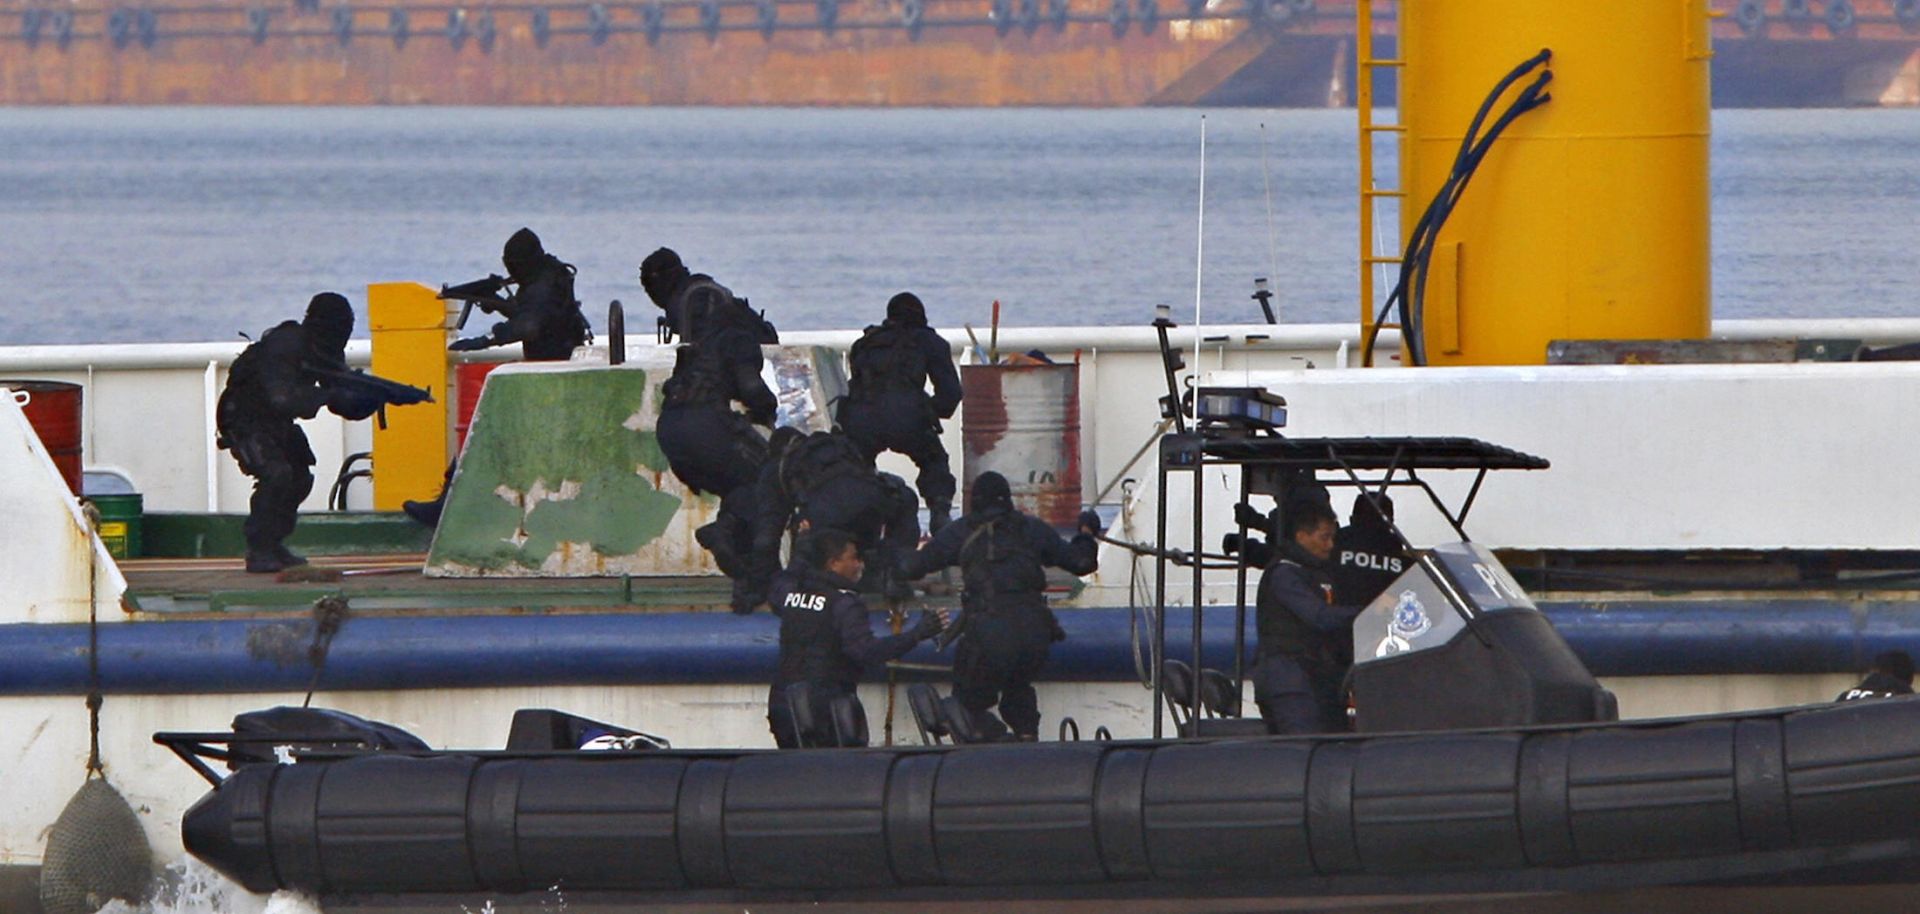 Royal Malaysian Police Special Forces personnel storm a mock hijacked ship during an anti-piracy demonstration exercise June 13, 2007, in Port Klang, Malaysia.